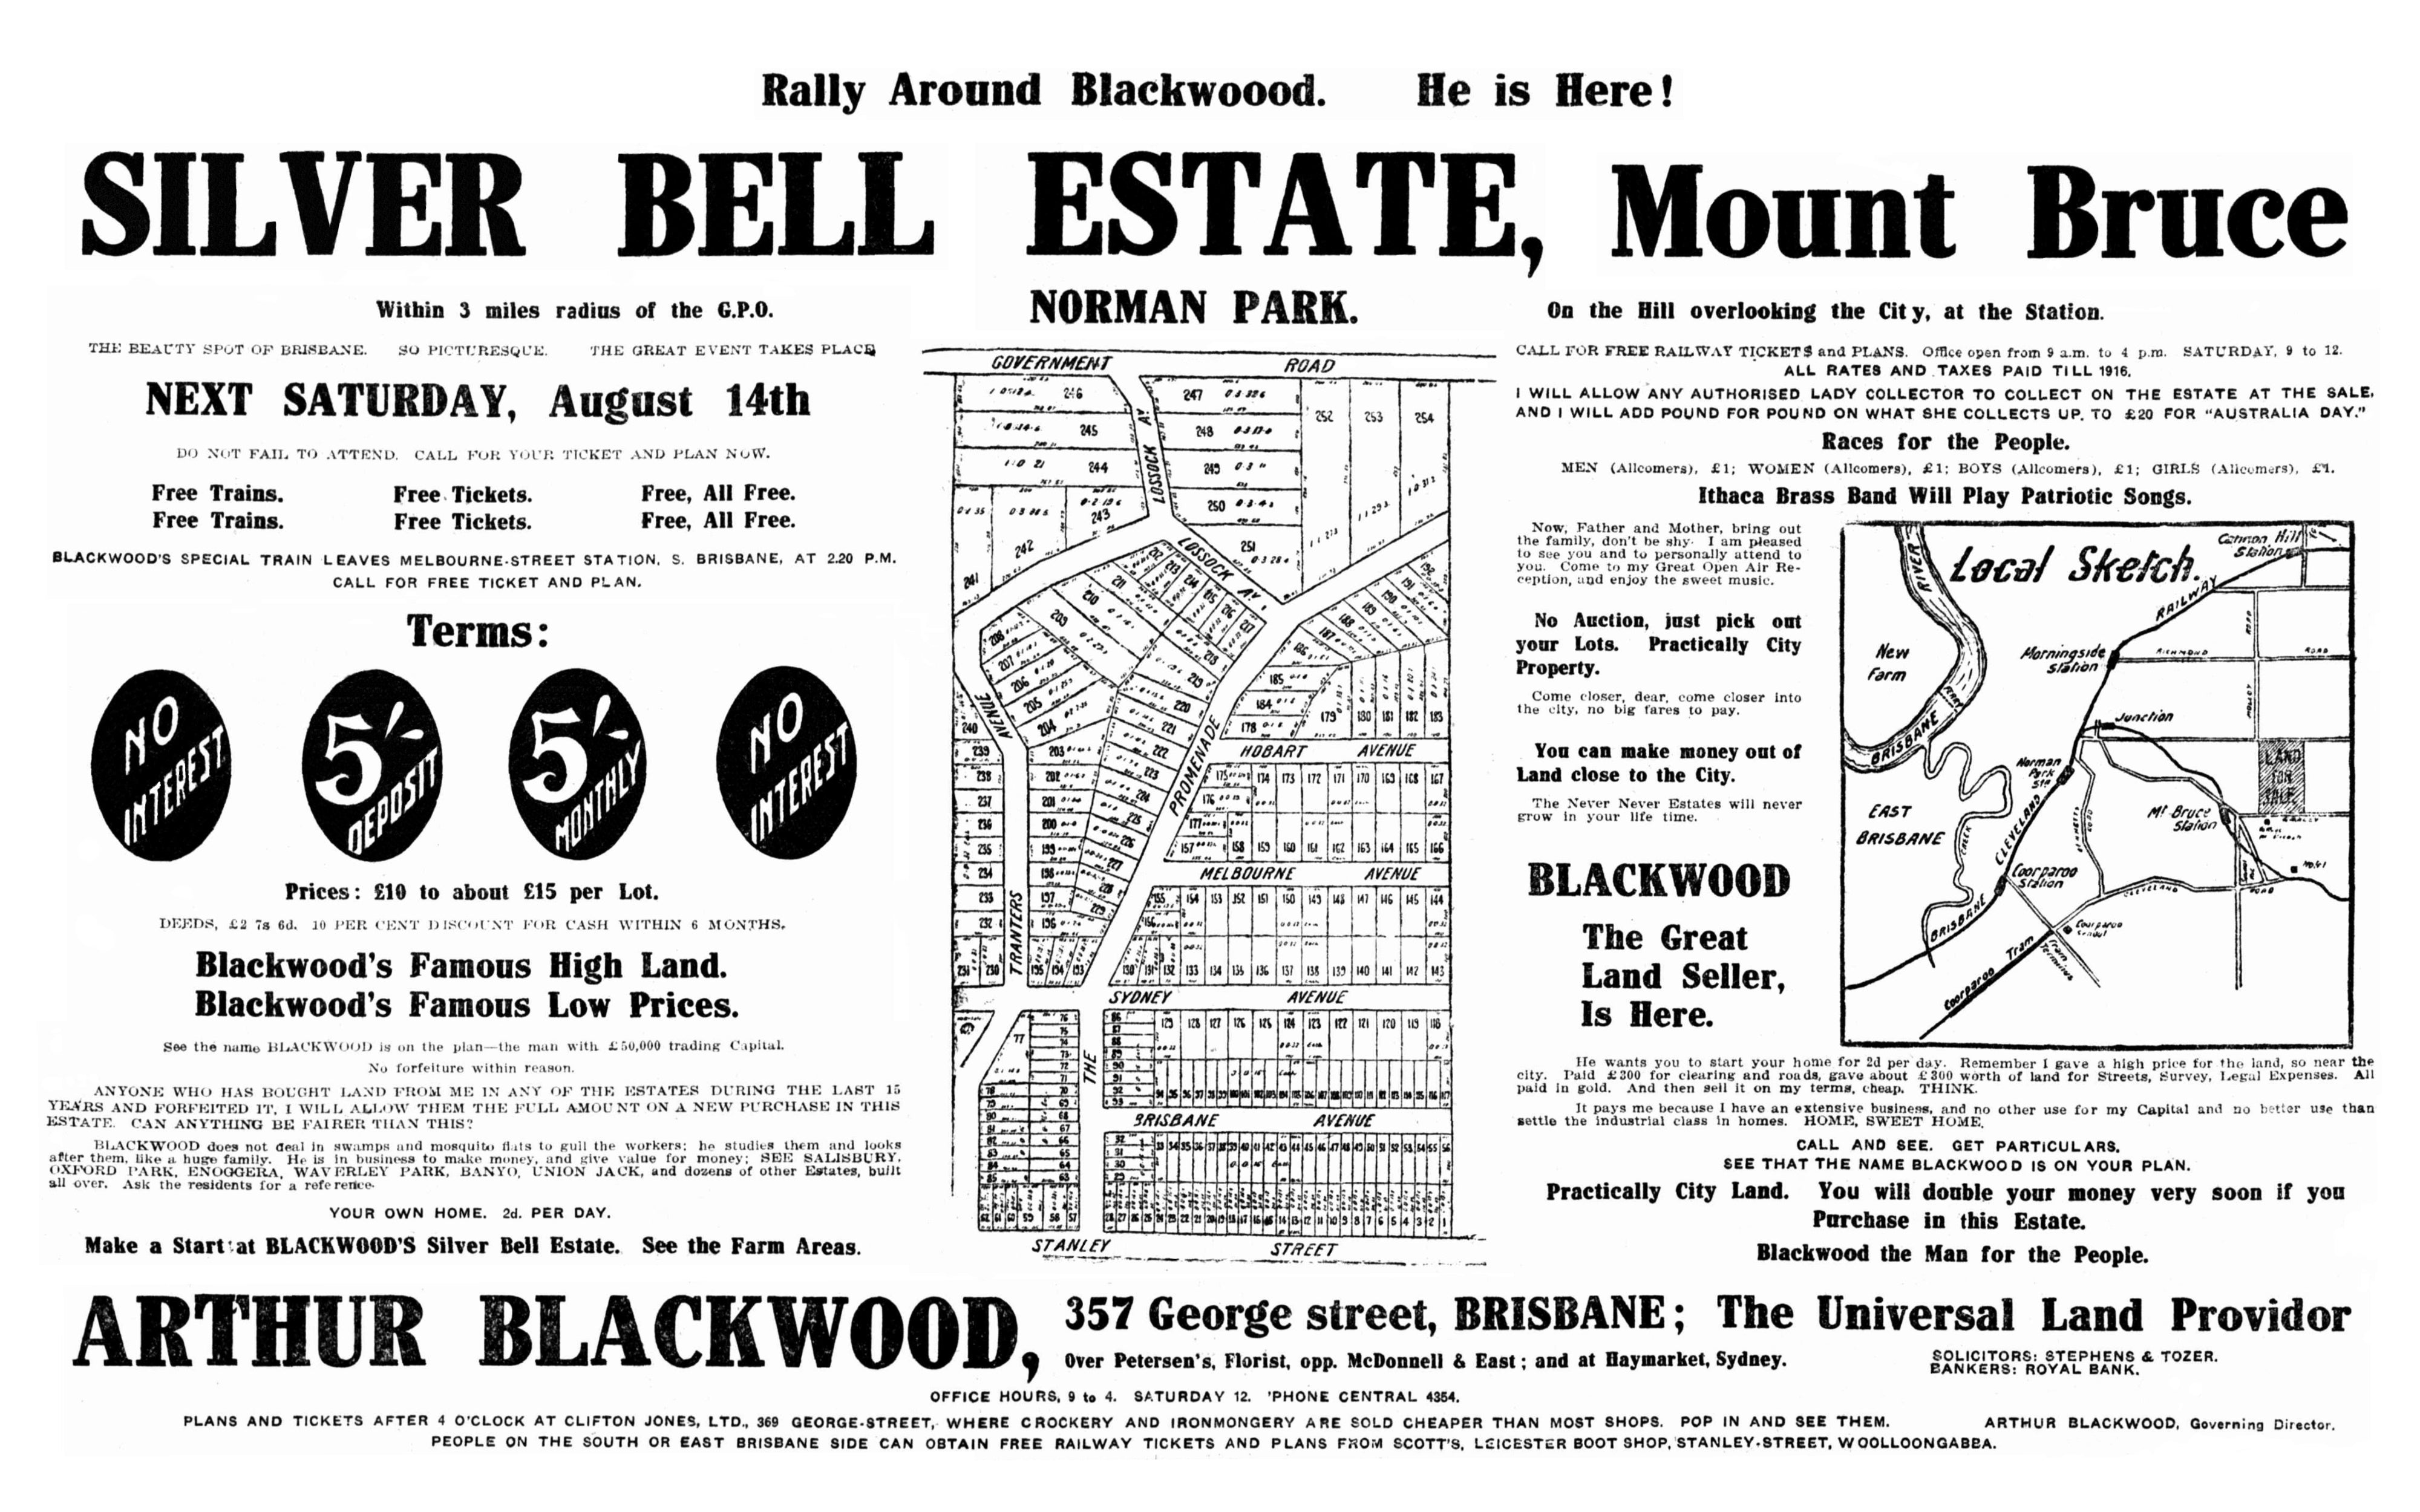 1915 Camp Hill - Silver Bell - Mt Bruce